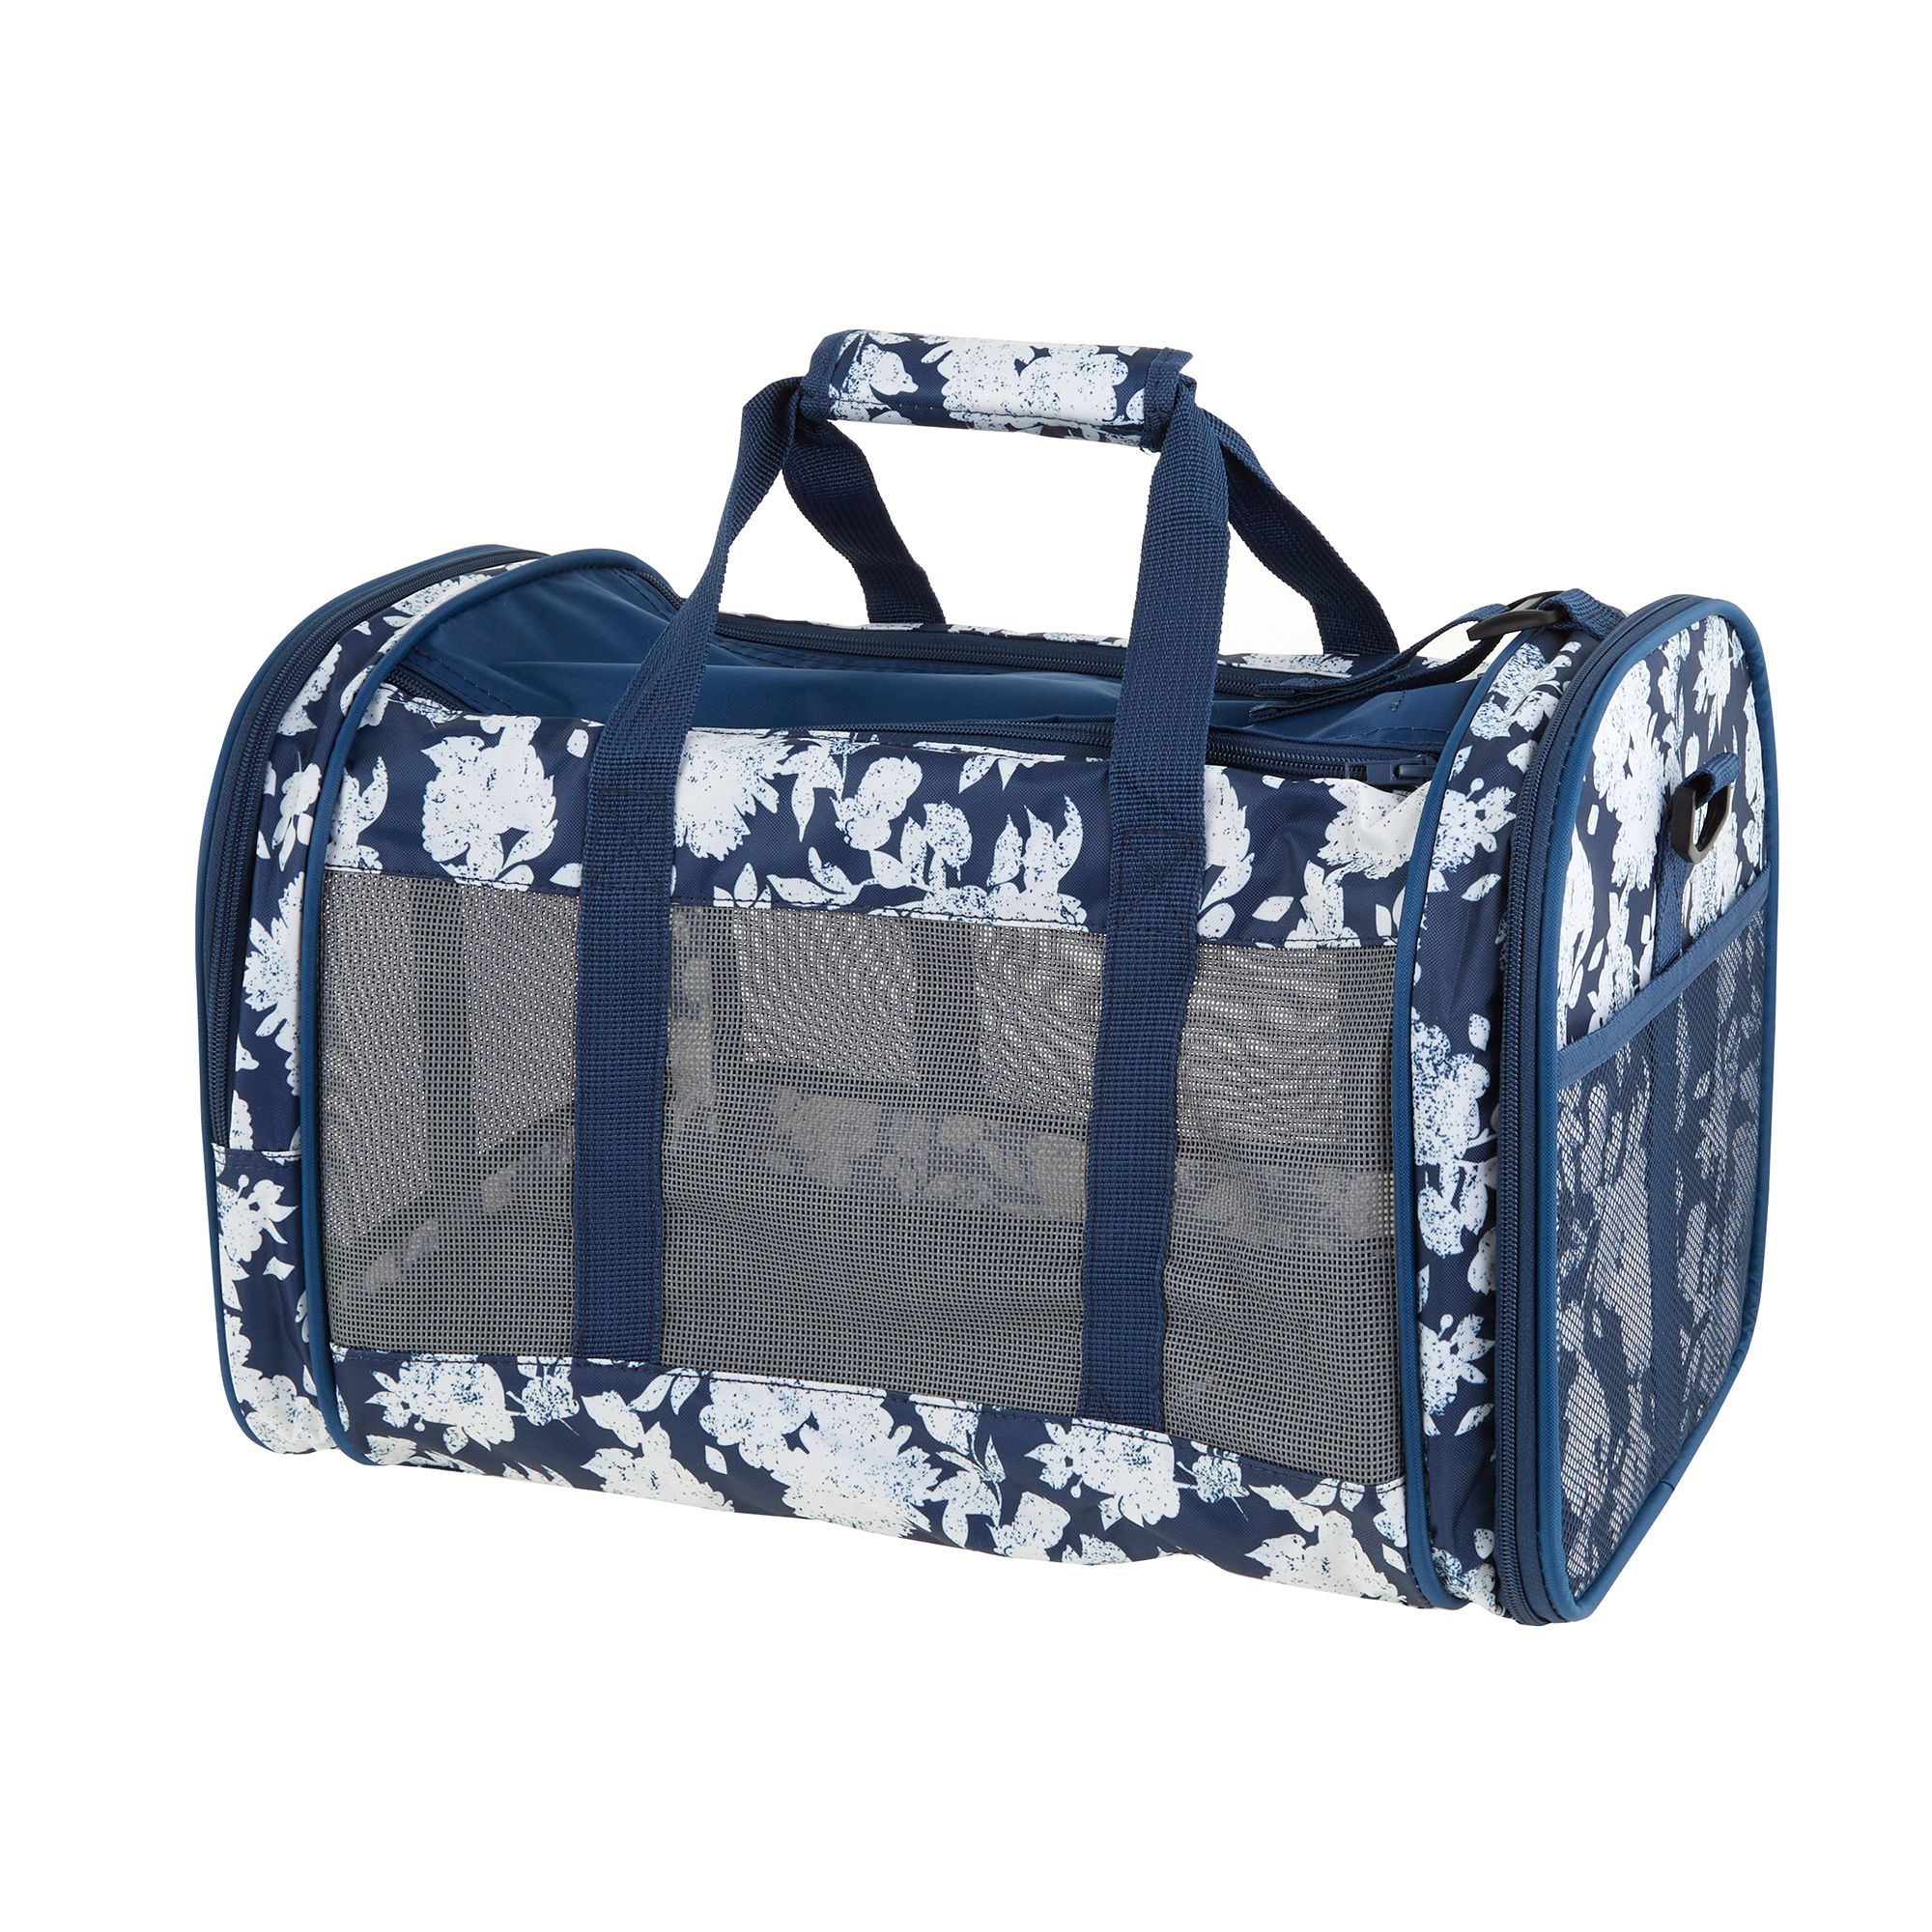 expandable travel carrier